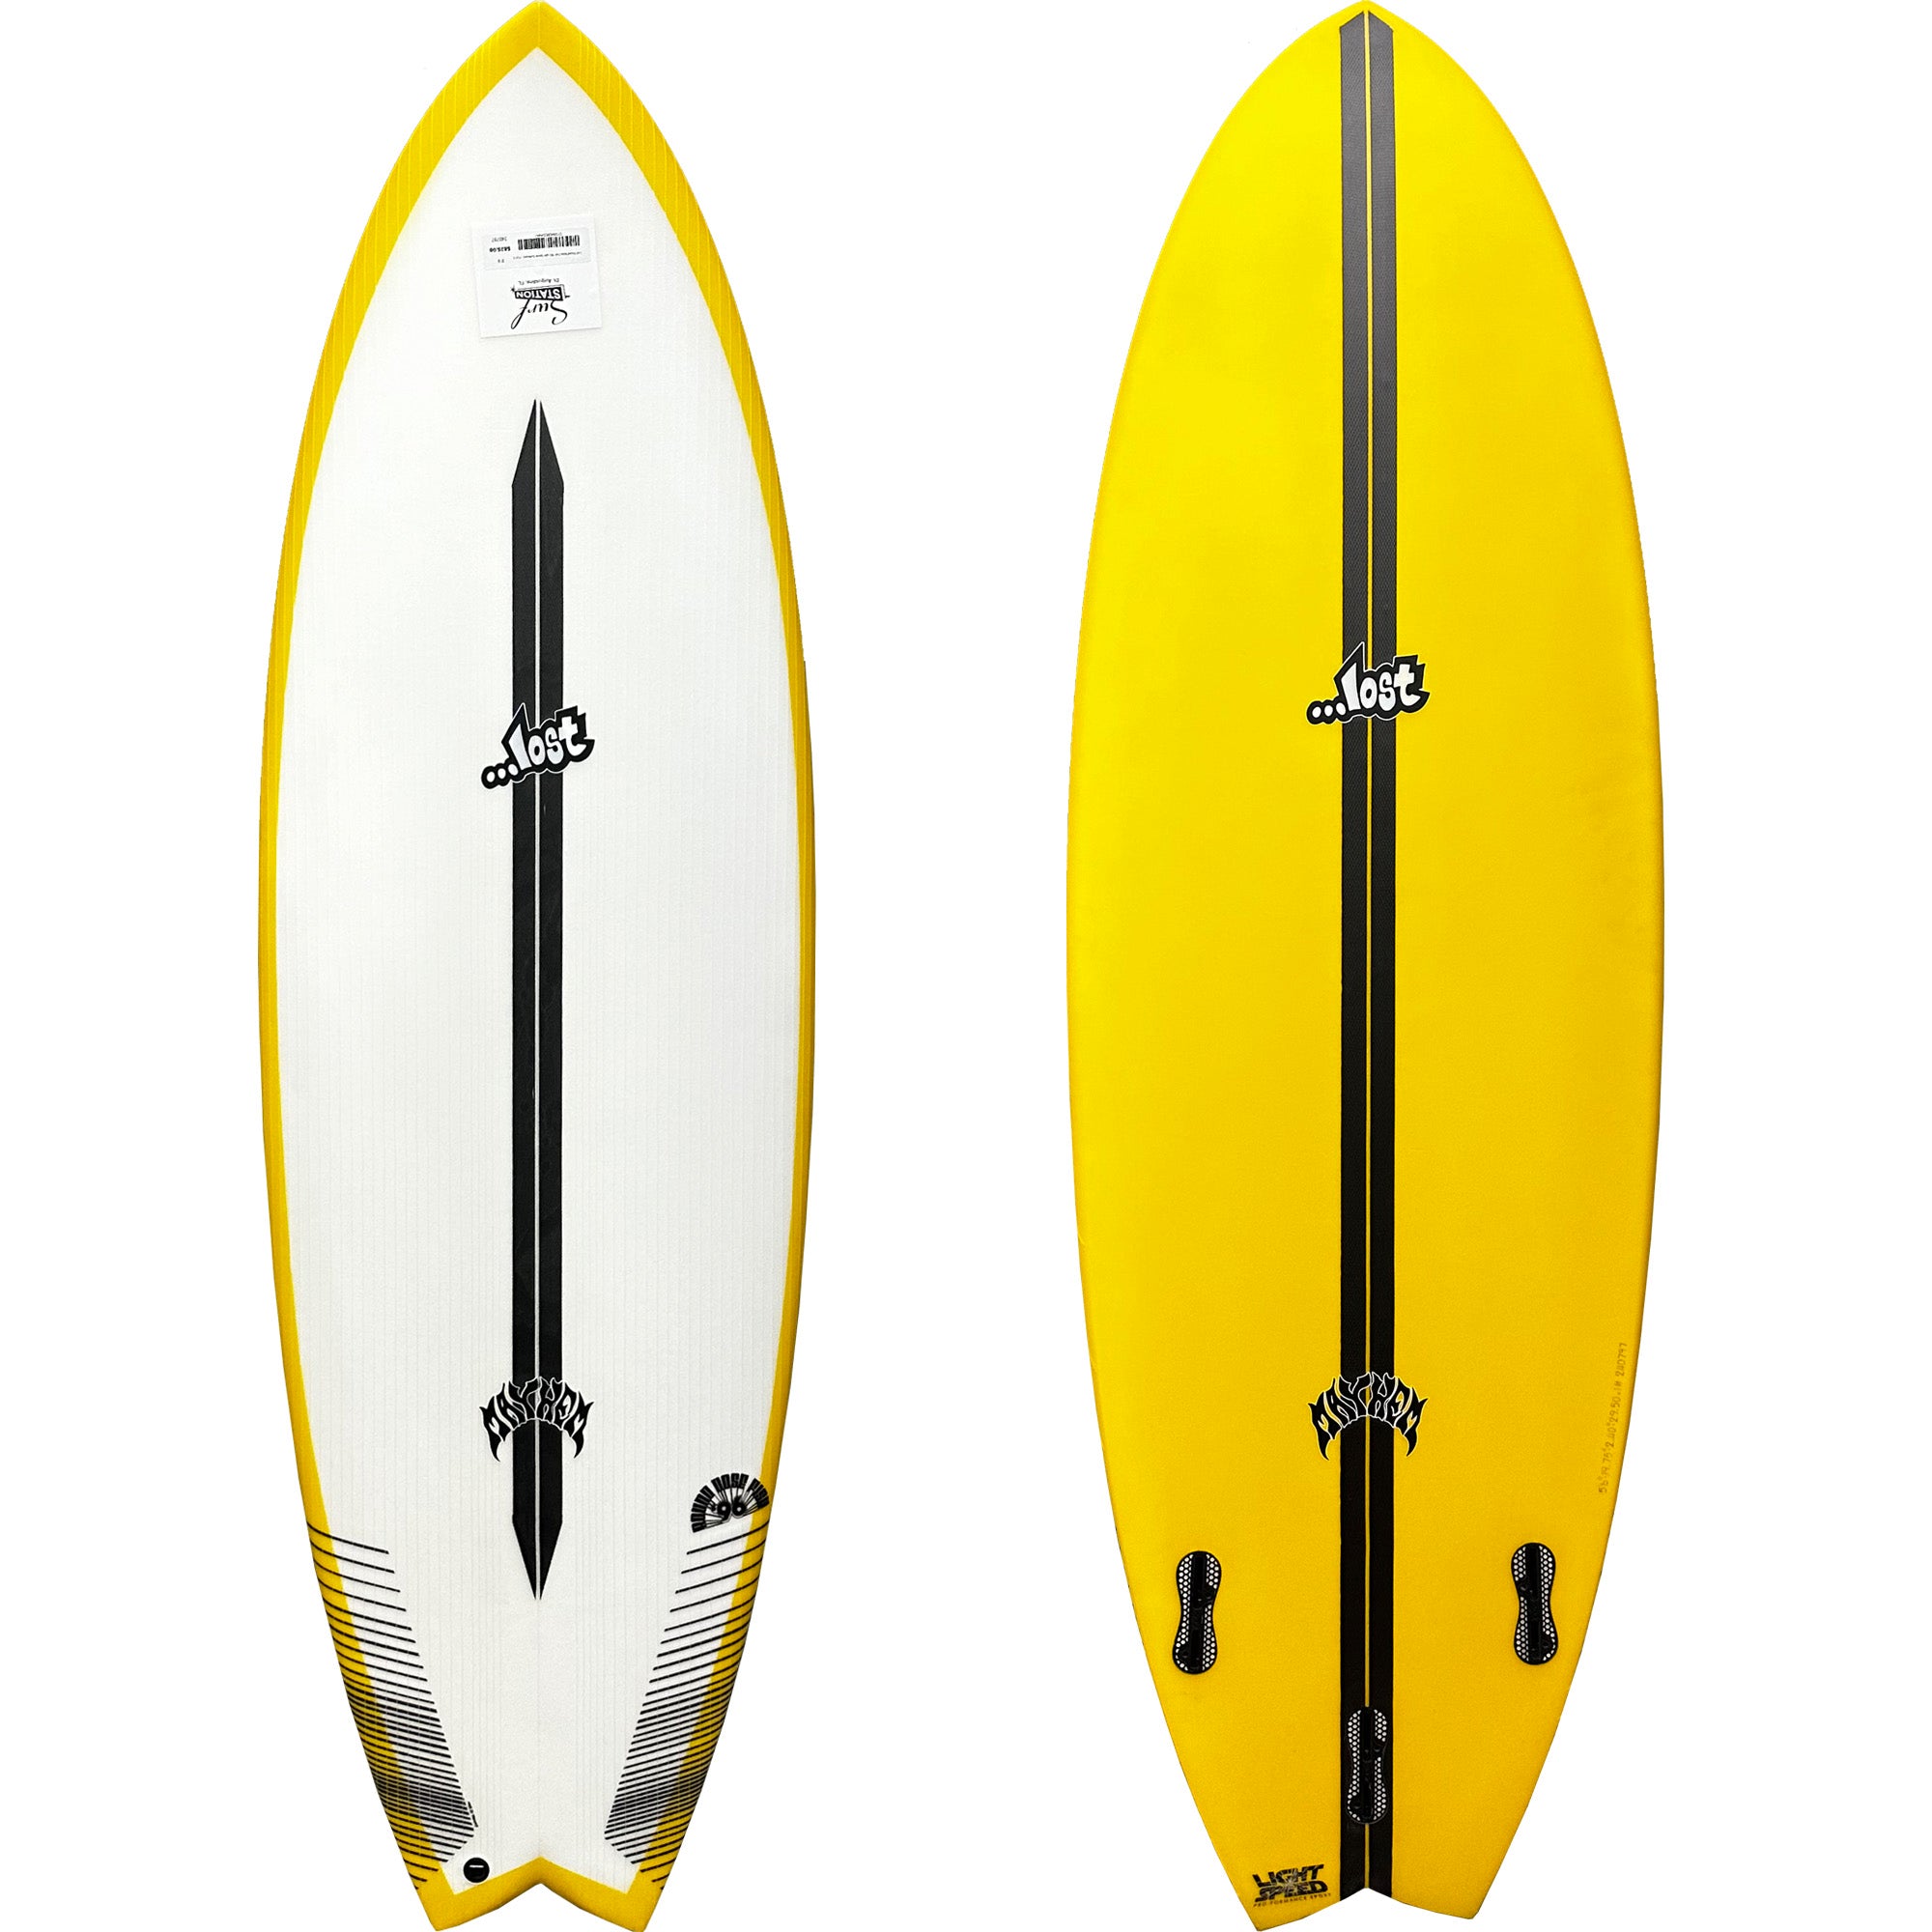 Lost Round Nose Fish '96 Light Speed Surfboard - FCS II